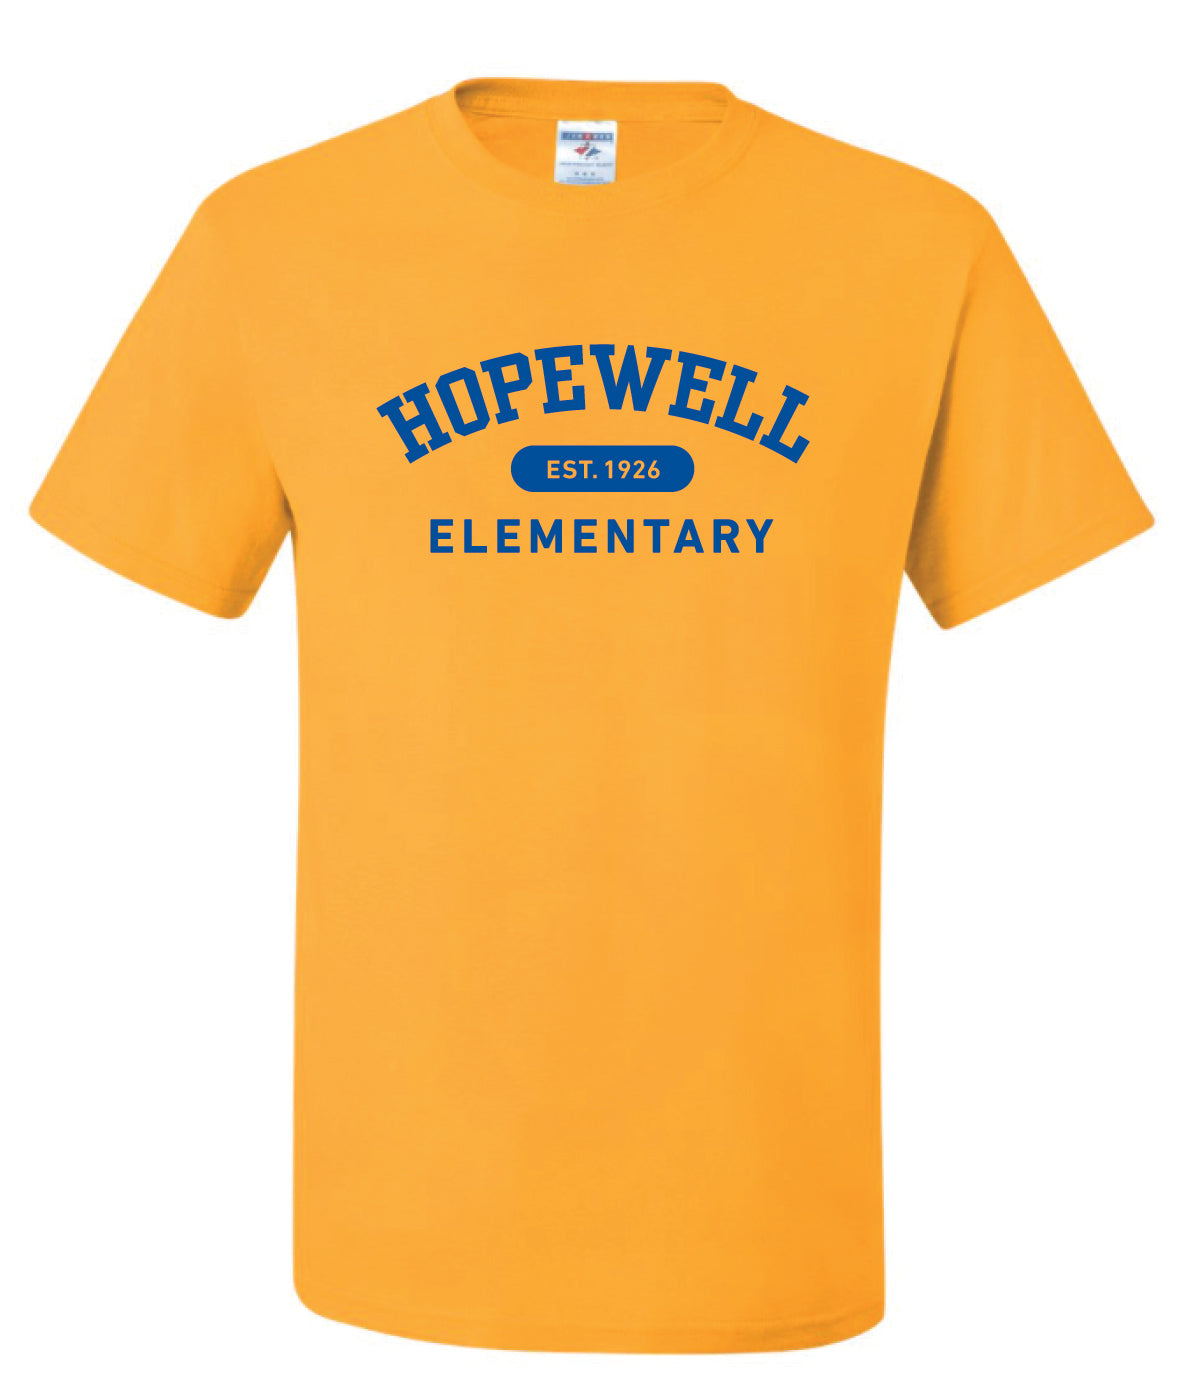 Hopewell Elementary Gold T-Shirt - Adult and Youth